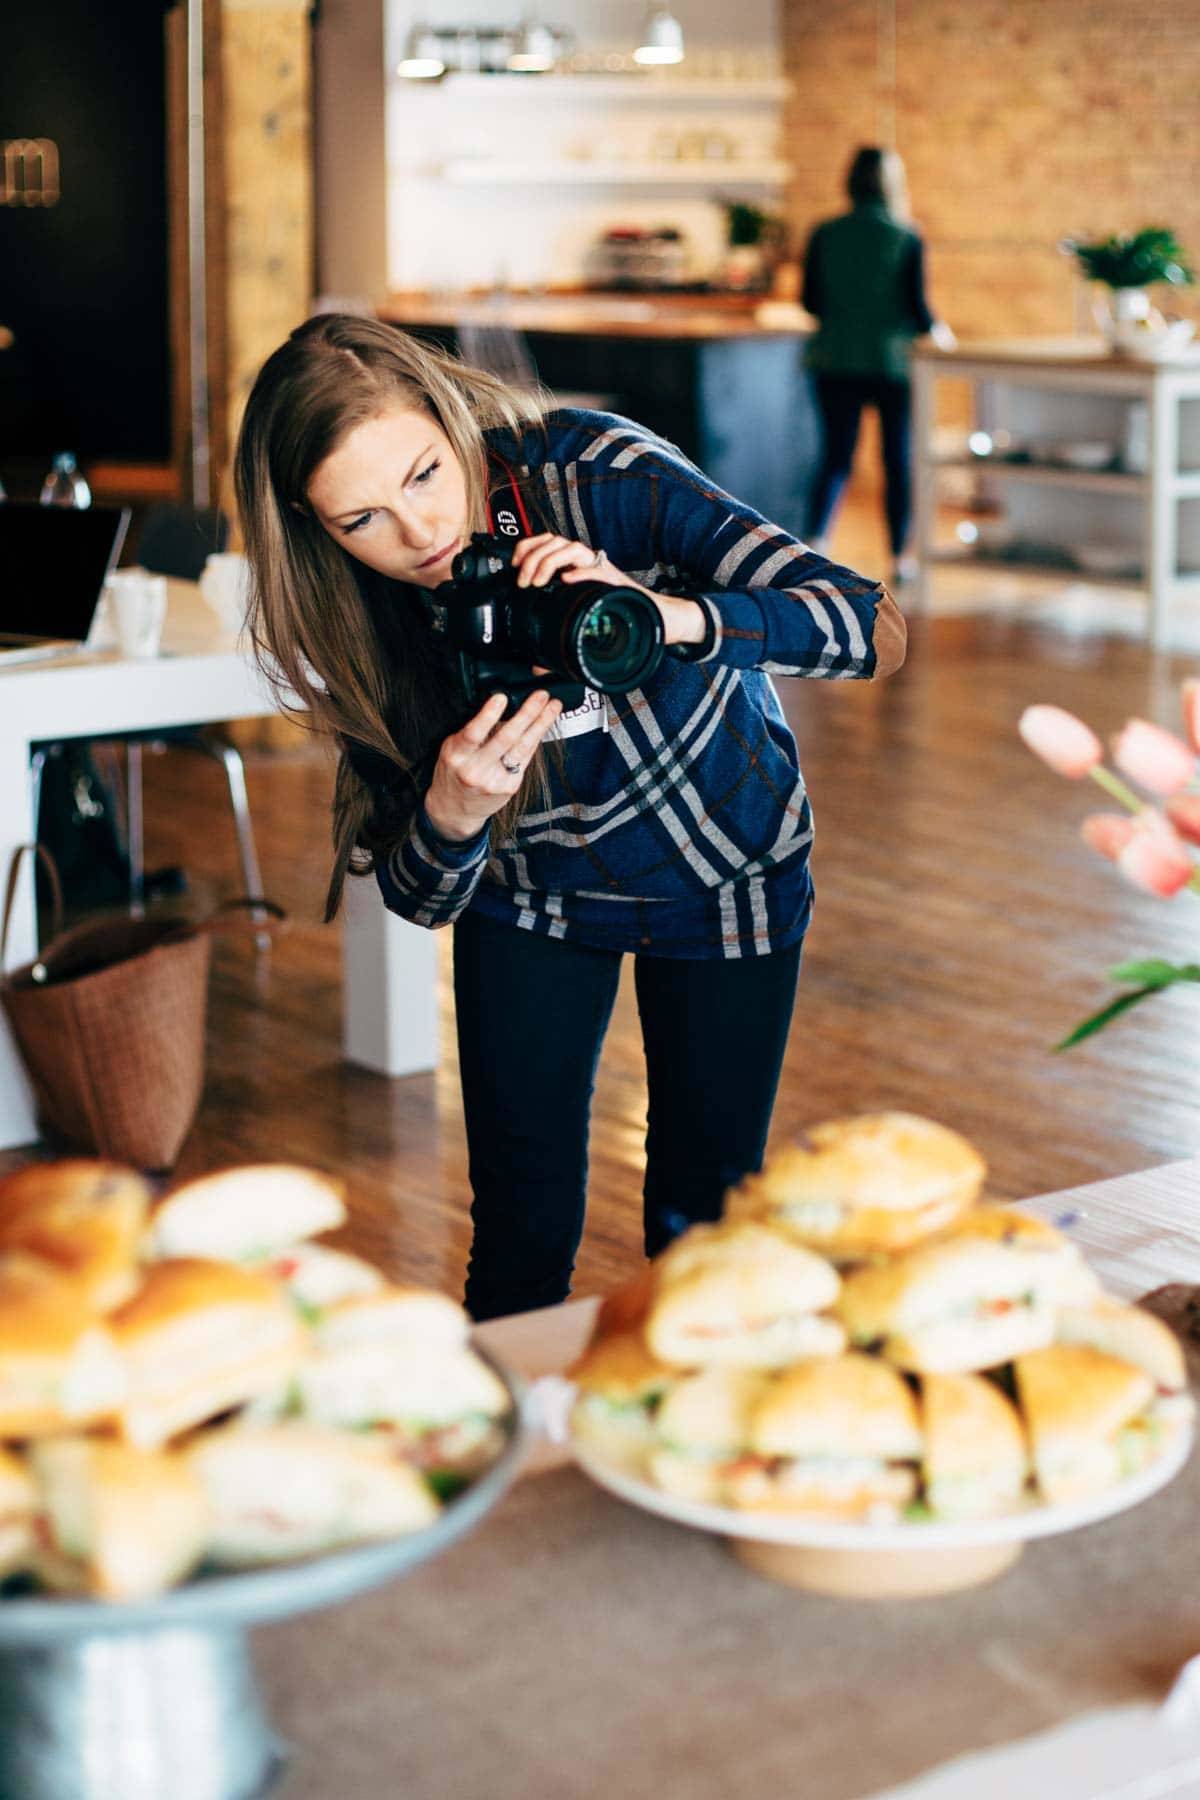 Woman photographing sandwiches.